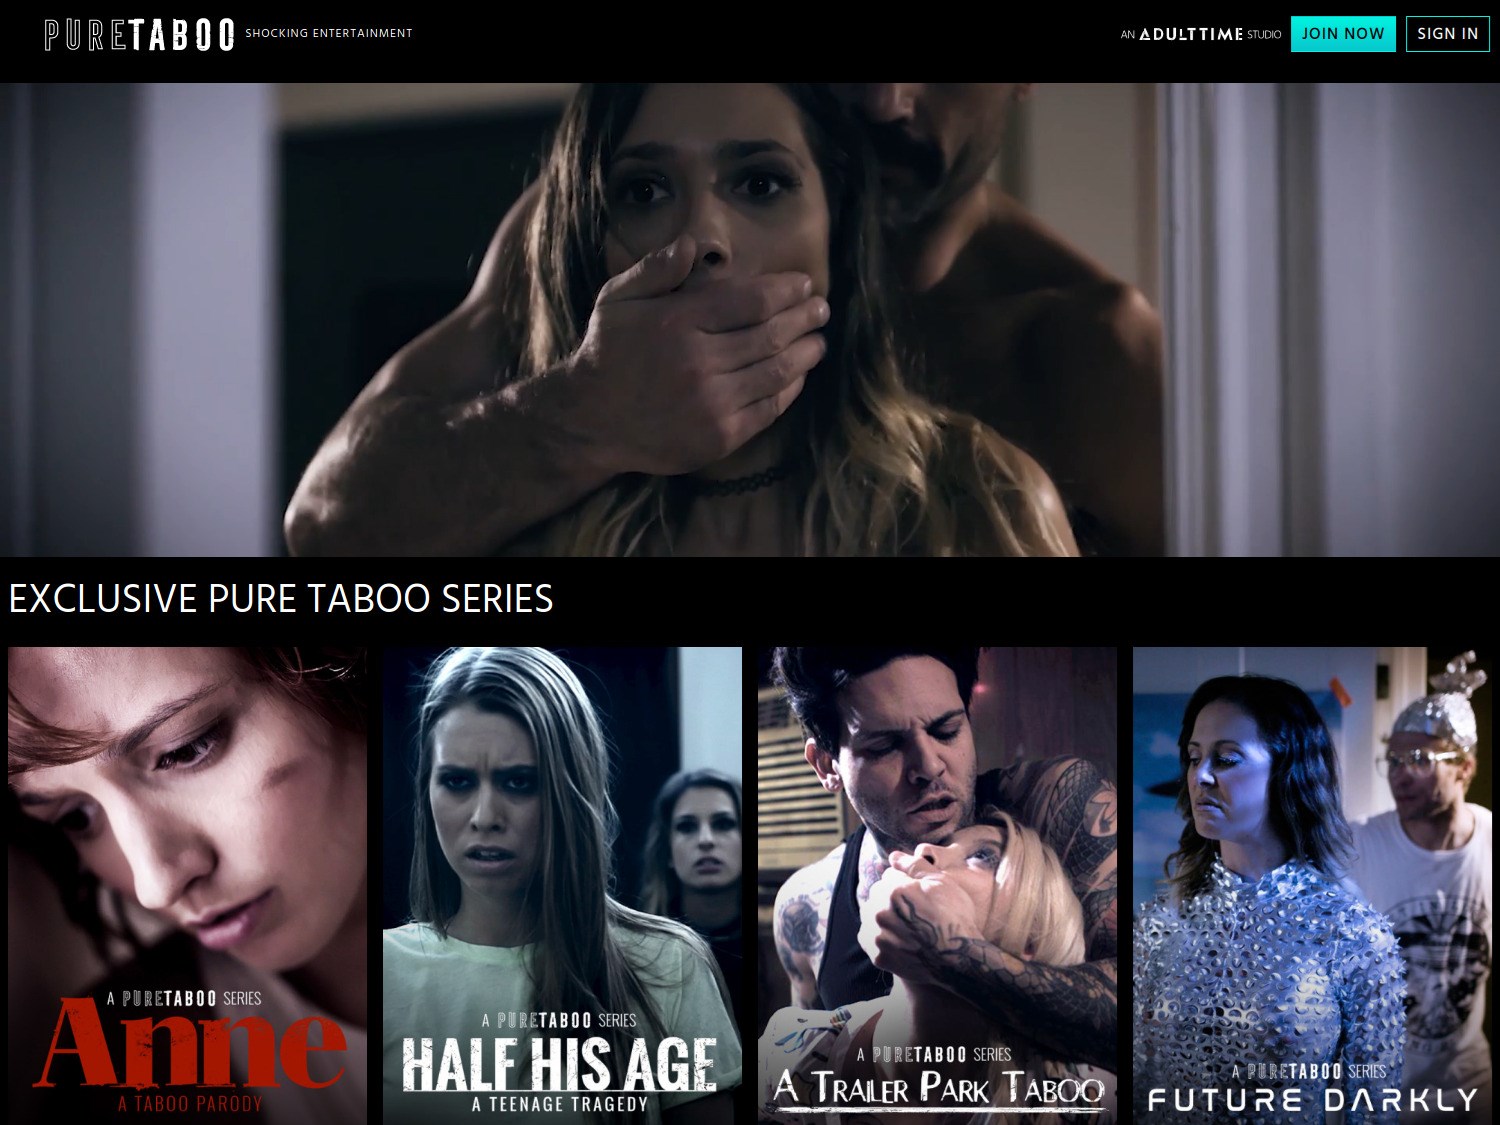 Pure taboo episodes